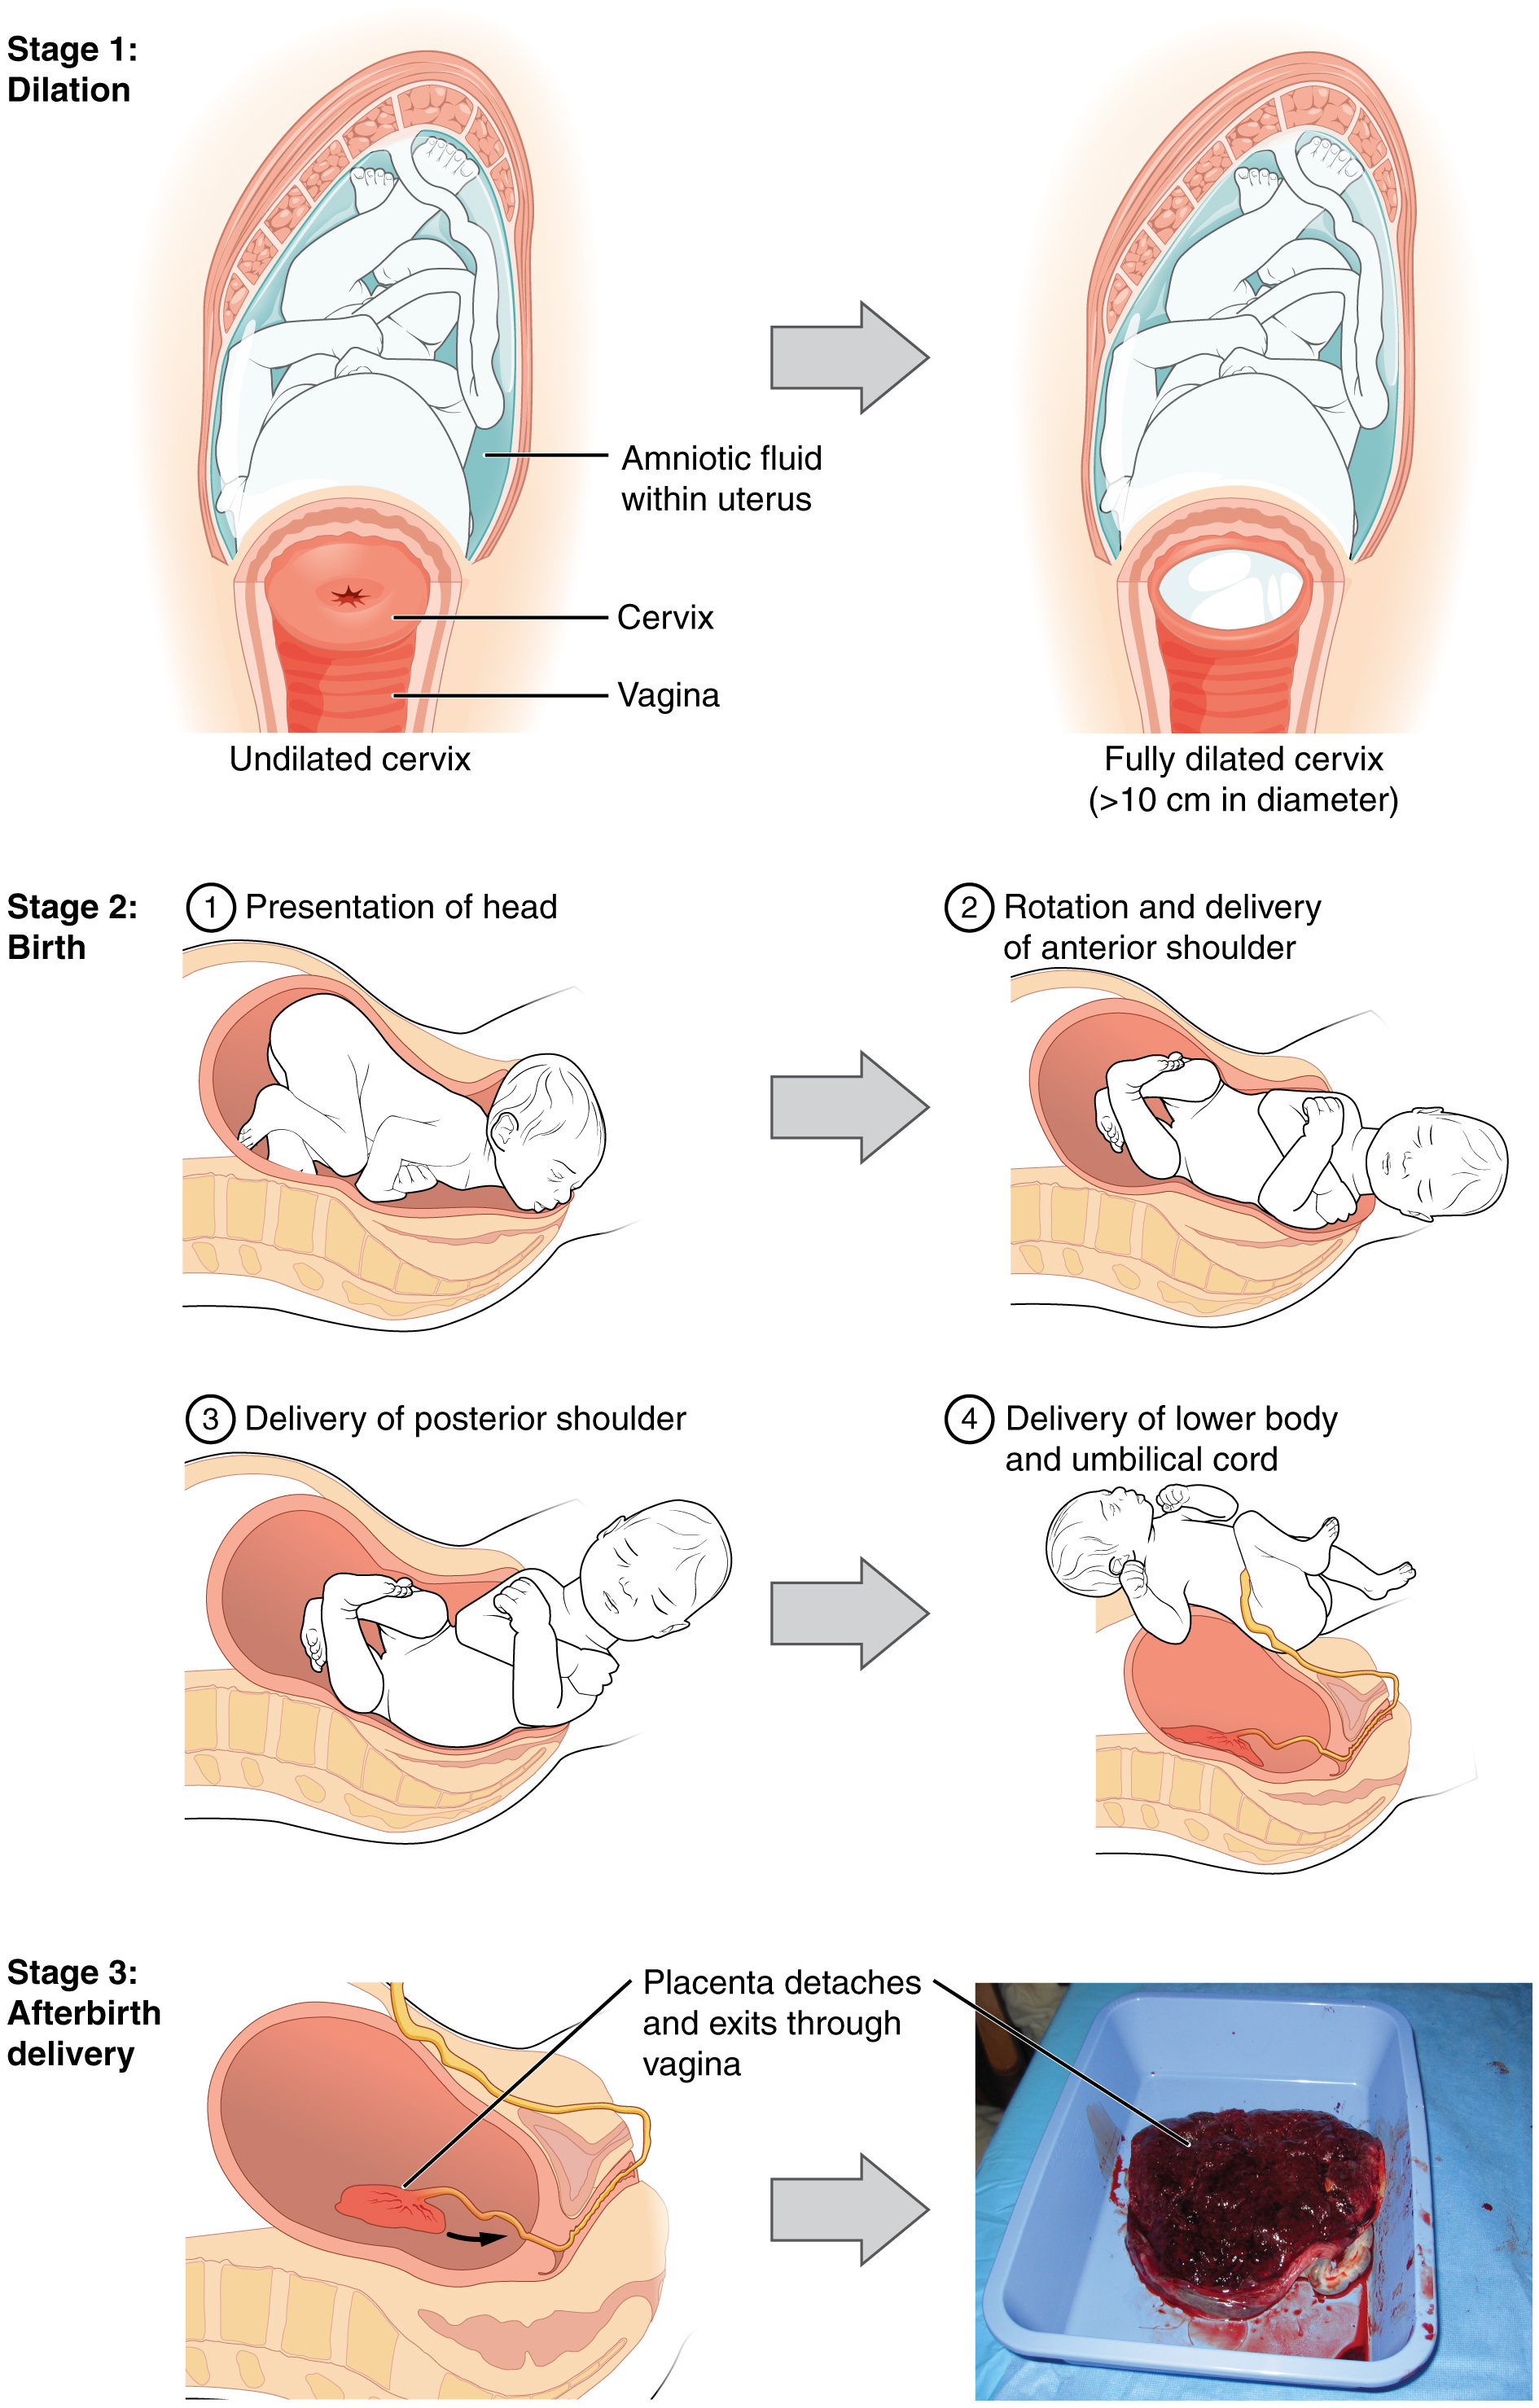 This multi-part figure shows the different stages of childbirth. The top panel shows dilation of the cervix (undilated vs fully dilated), the middle panel shows birth (presentation of the head, rotation and delivery of anterior shoulder, delivery of posterior shoulder, delivery of lower body and umbilical cord), and the bottom panel shows afterbirth delivery.